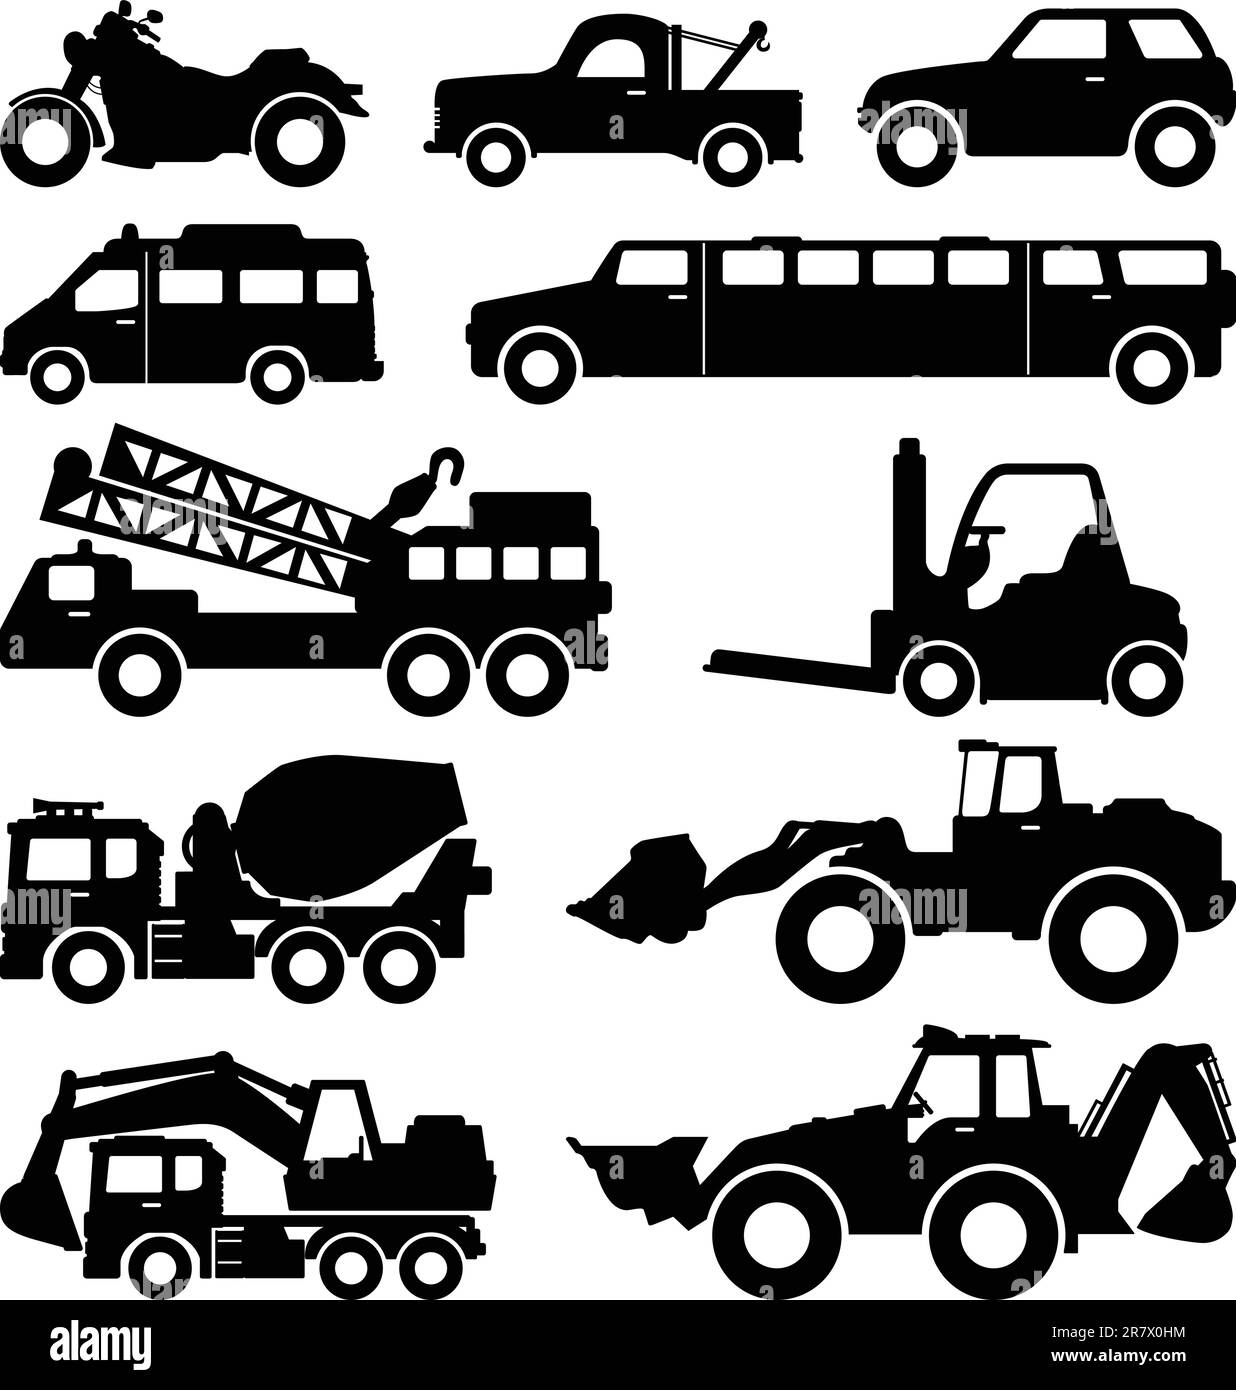 A set of transportation type and construction vehicles. Stock Vector